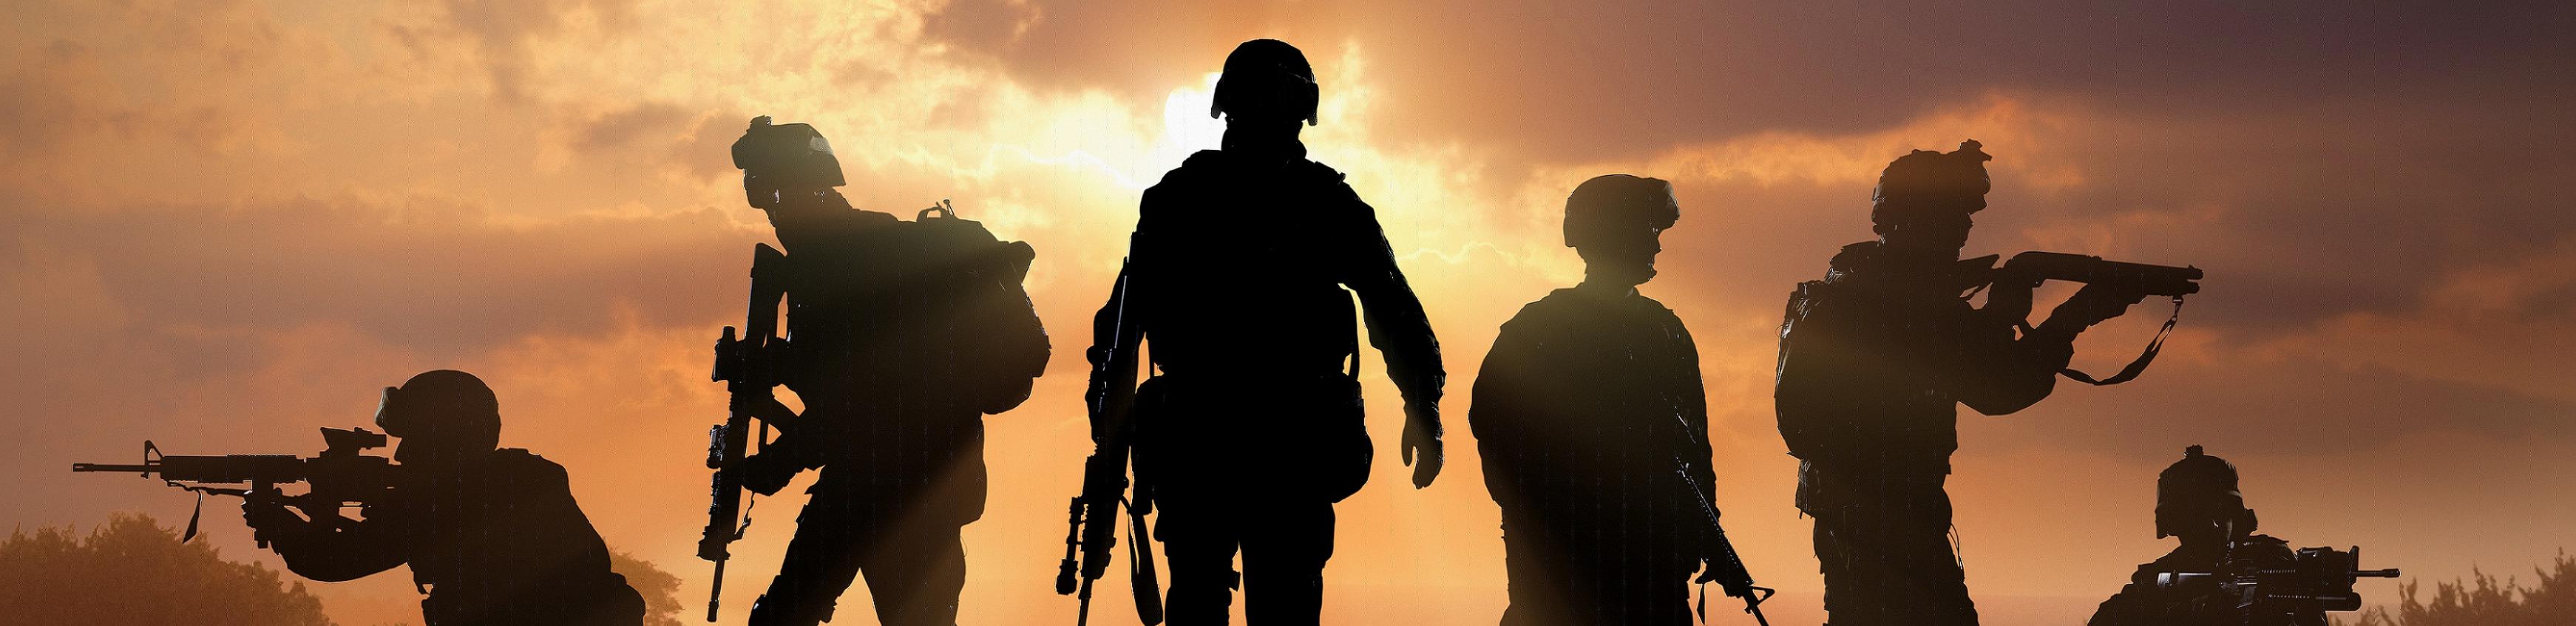 Six Military Silhouettes On Sunset Sky Stock Photo